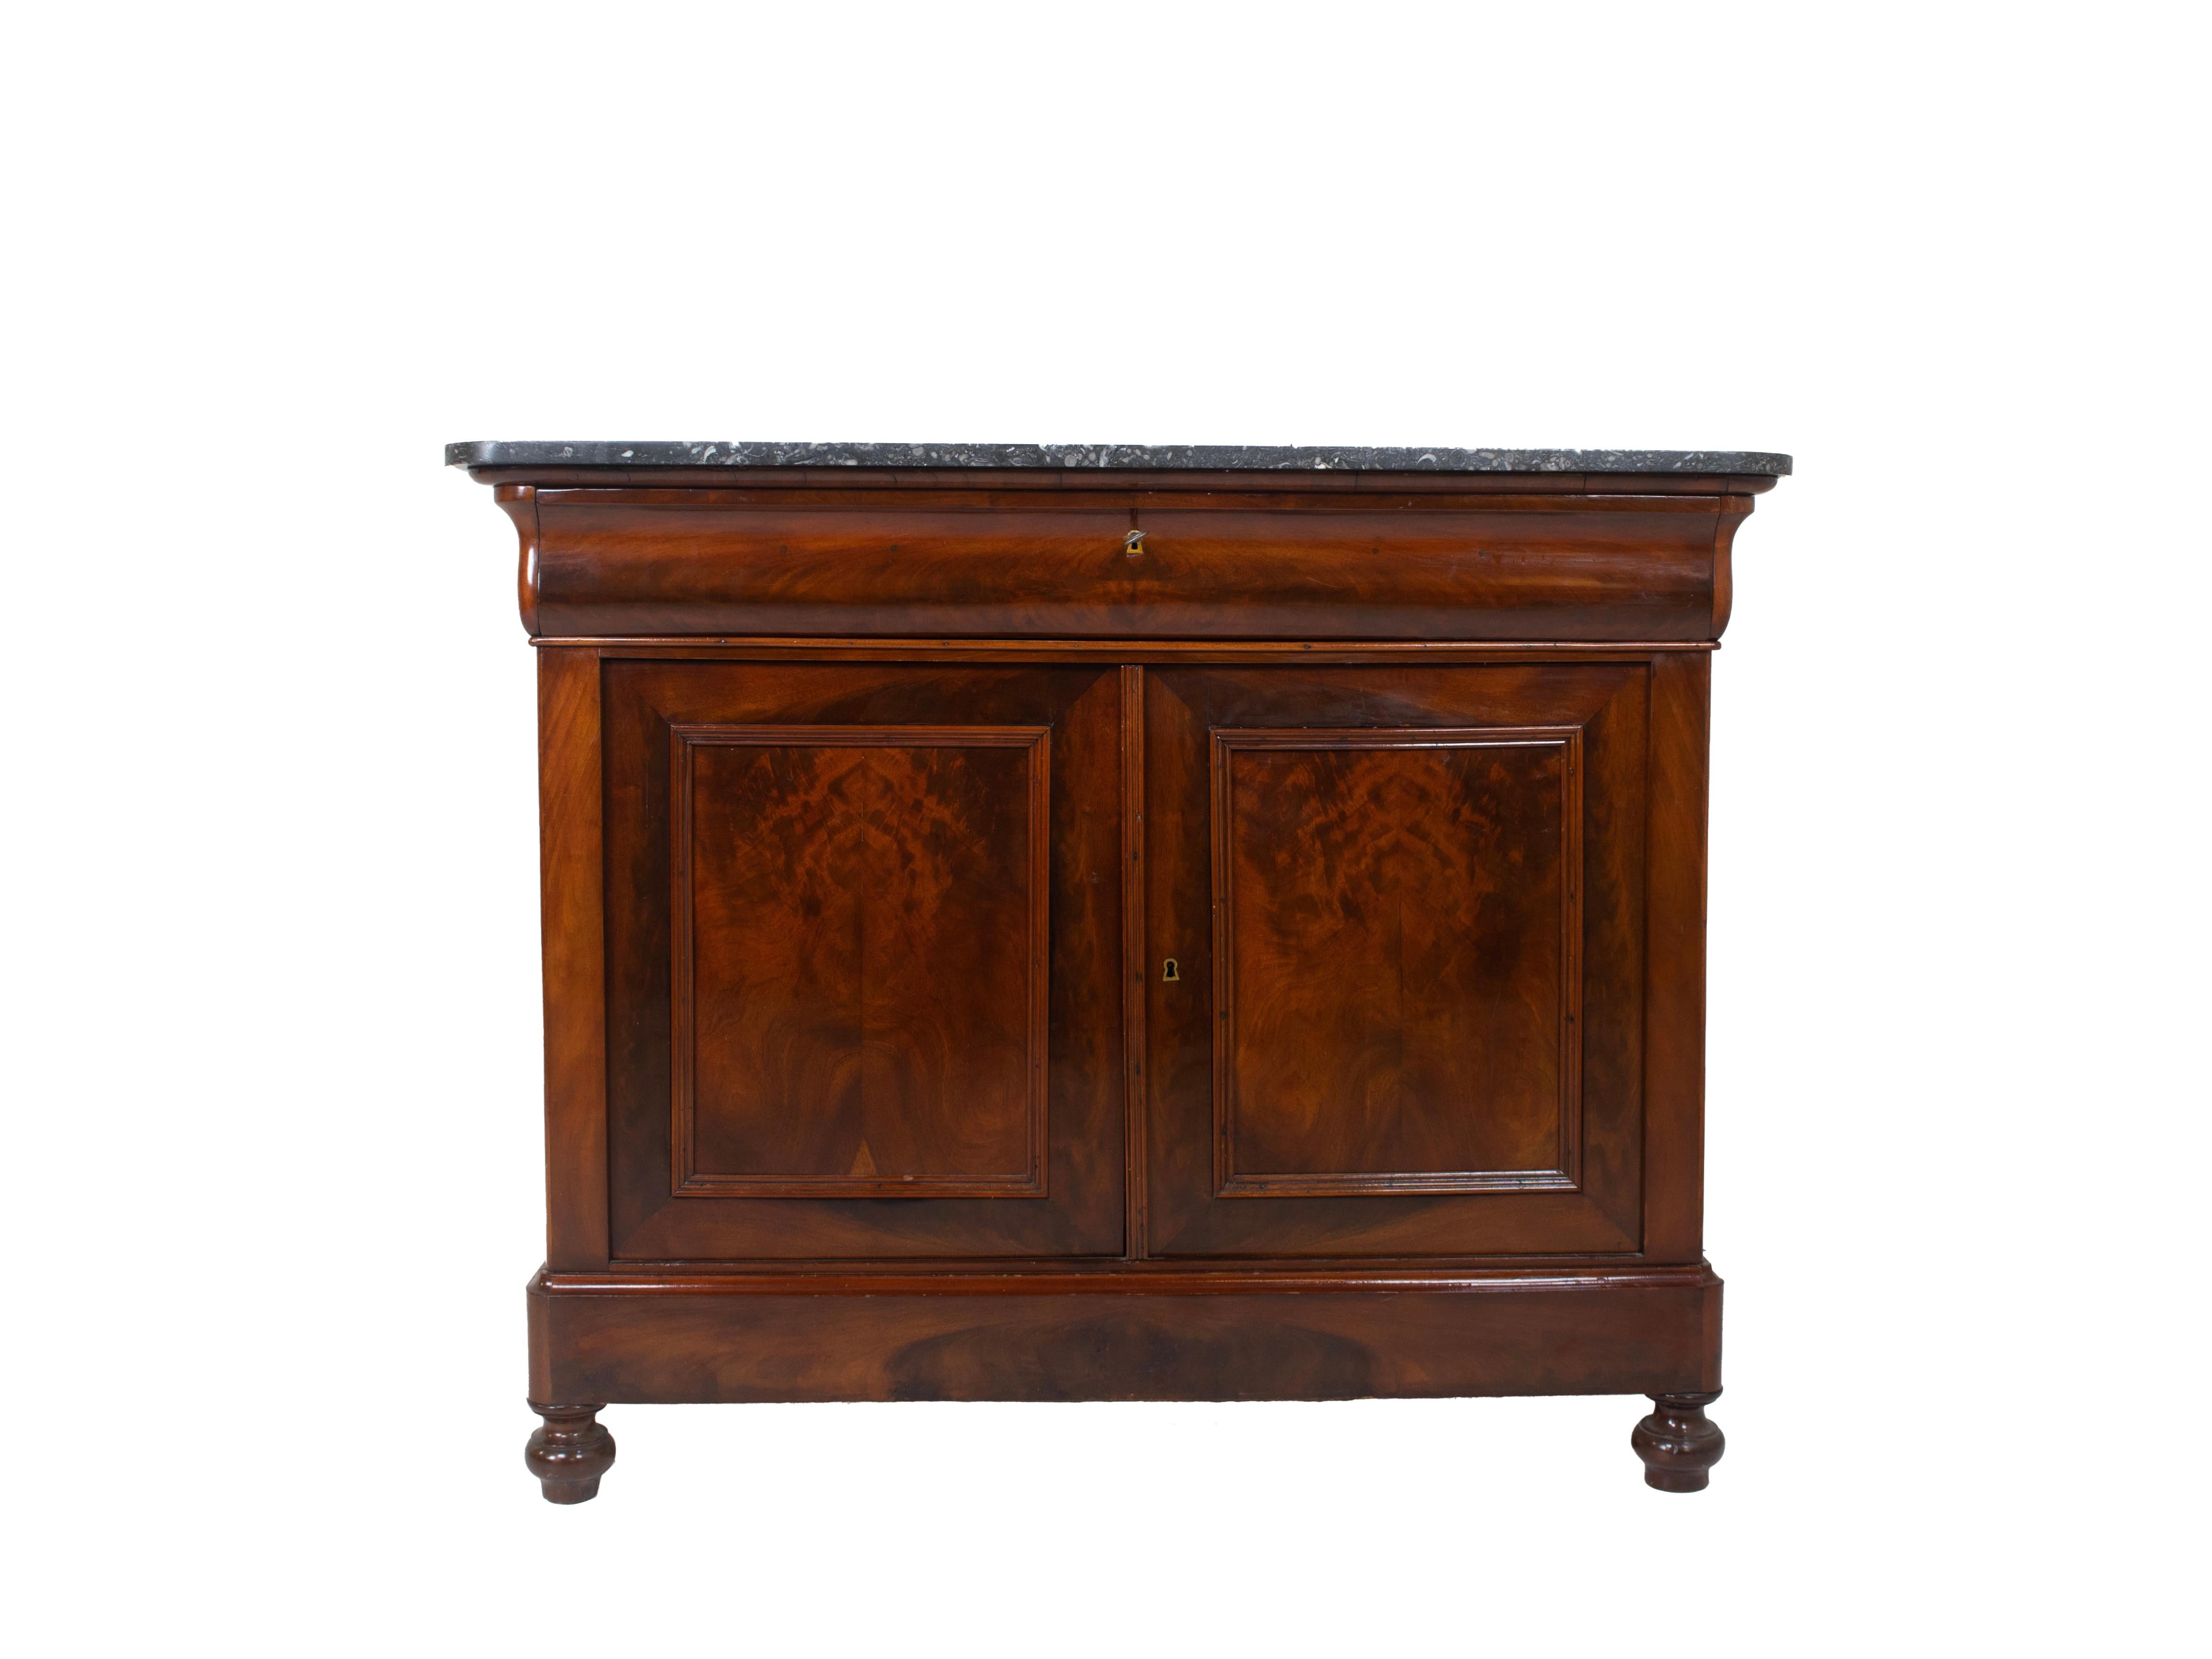 Dutch Early Biedermeier cabinet in mahogany with marble top. In great restored condition. As its Design is sleek, it perfectly fits both a modern and classic interior. The Marble Top makes it quite functional for every day use. The Mahogany wood has